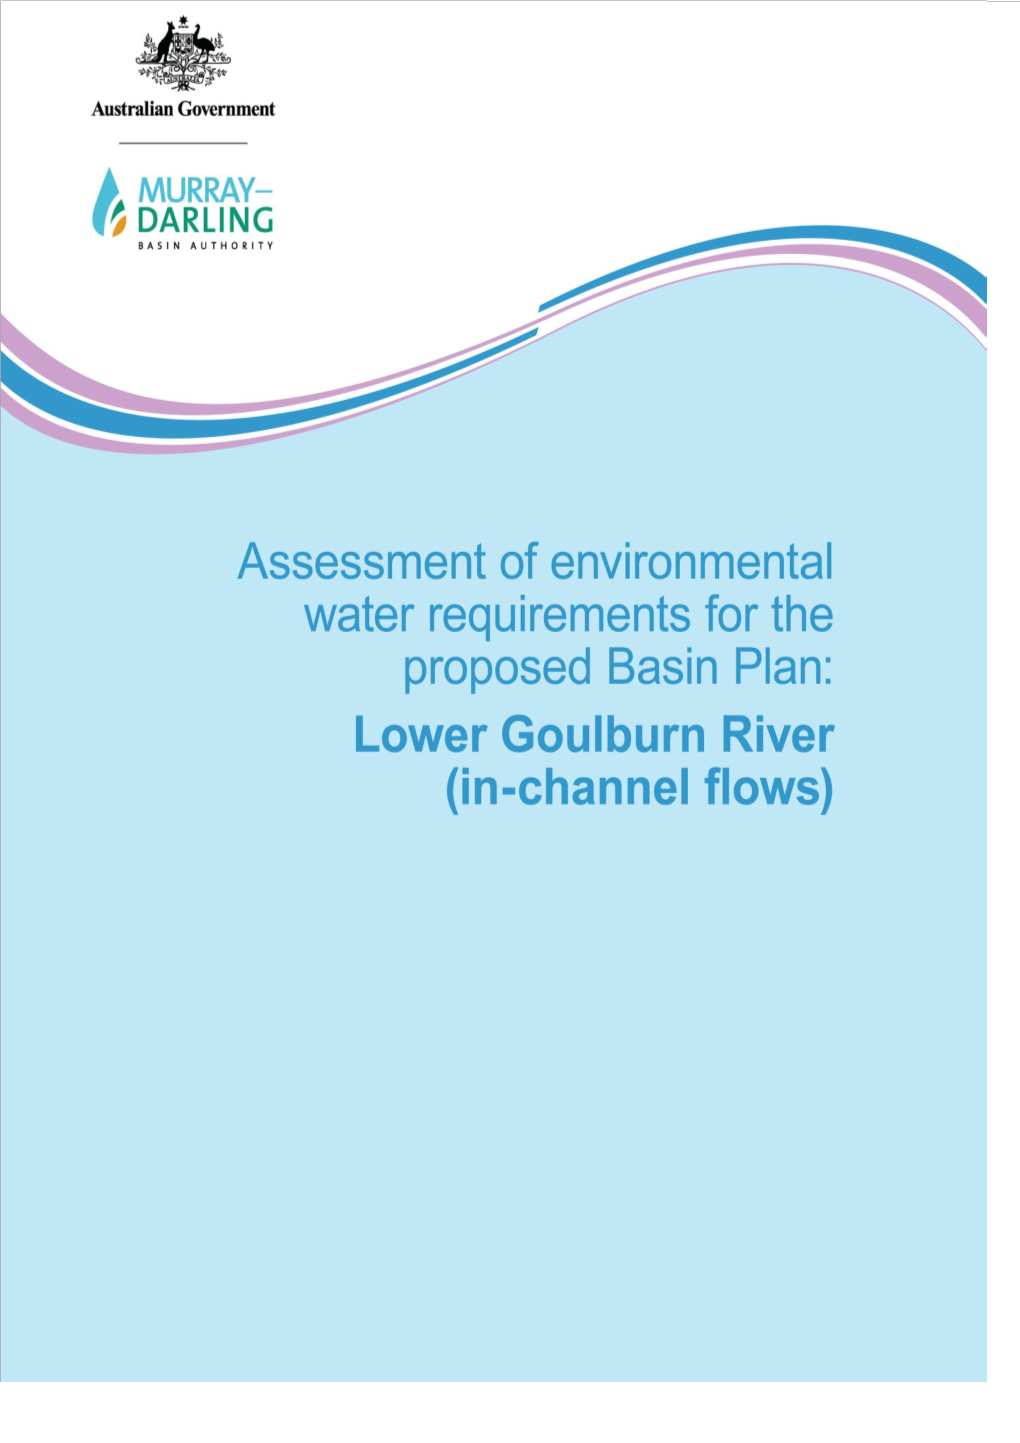 Assessment of Environmental Water Requirements for the Proposed Basin Plan:Lower Goulburn River